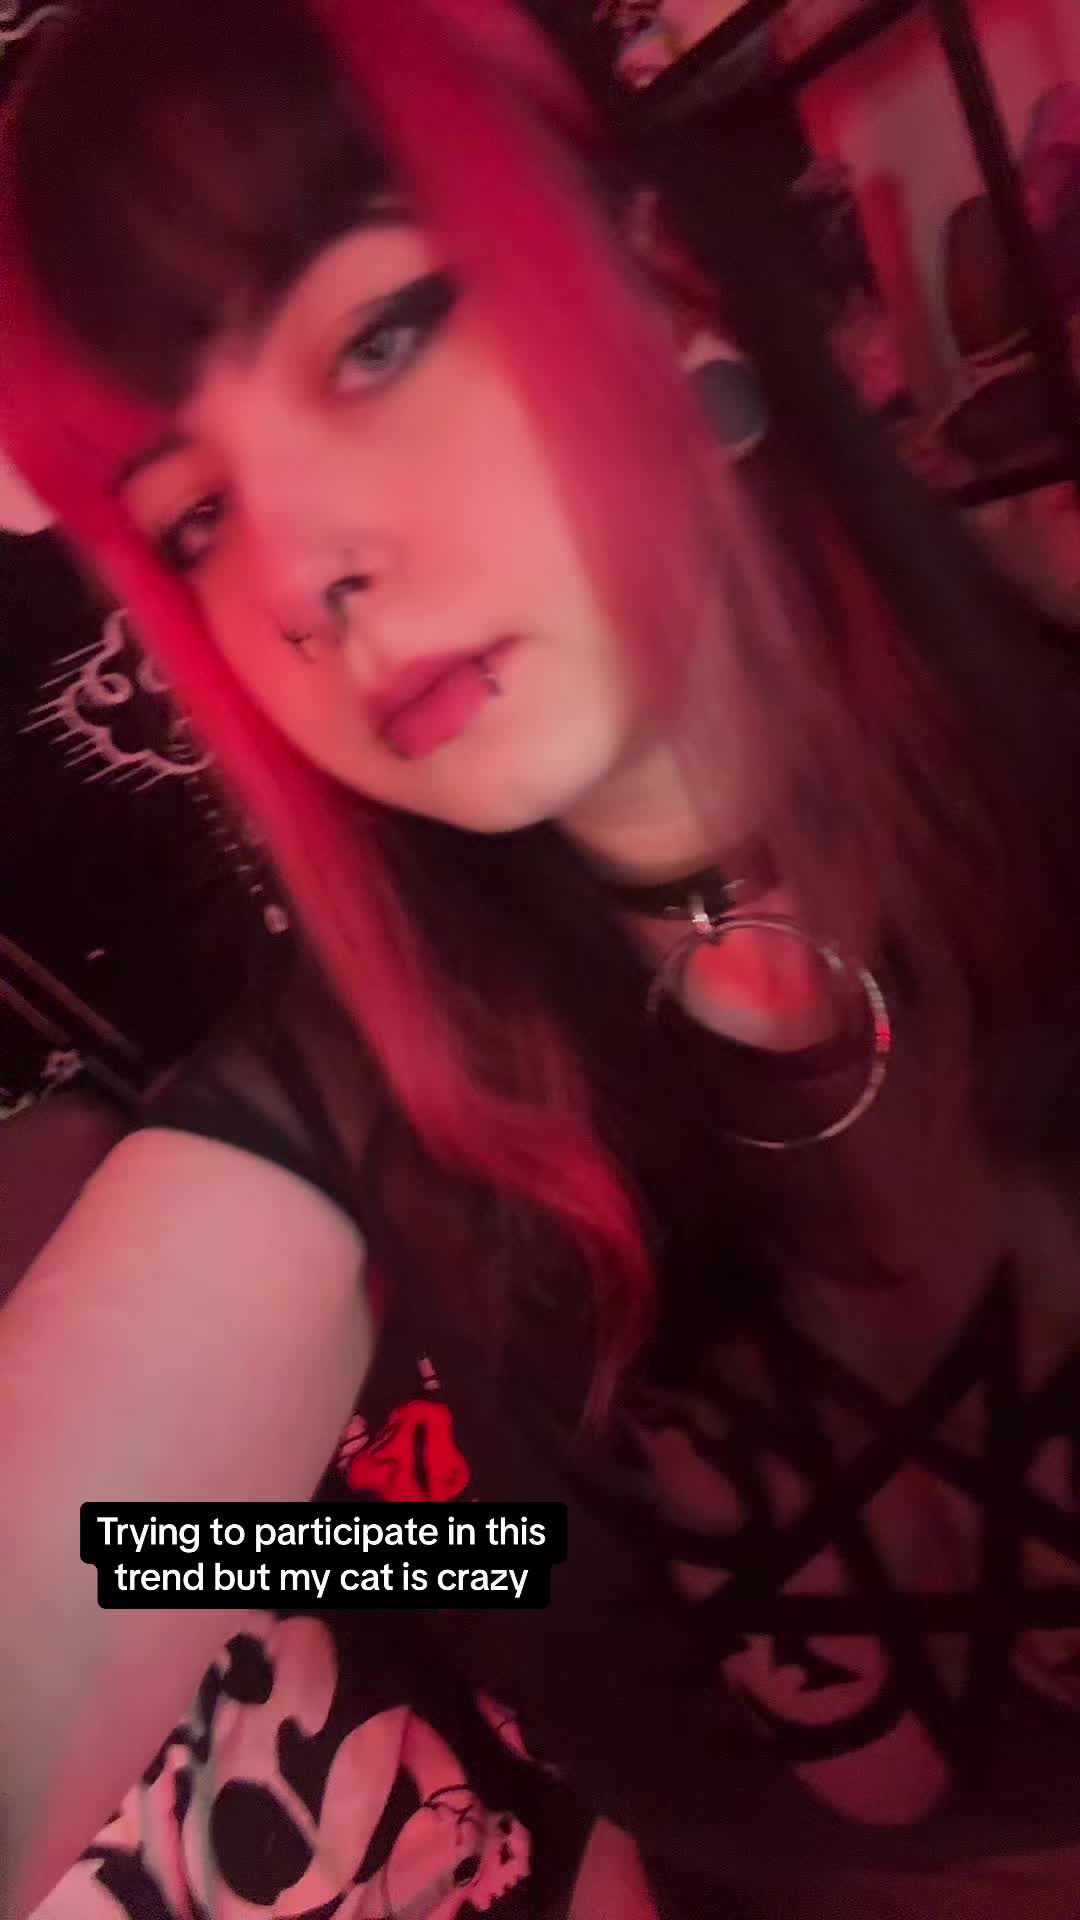 🤧 #gothgirl #altgirl #german  | Trying to participate in this trend but my cat is crazy | Country: DE